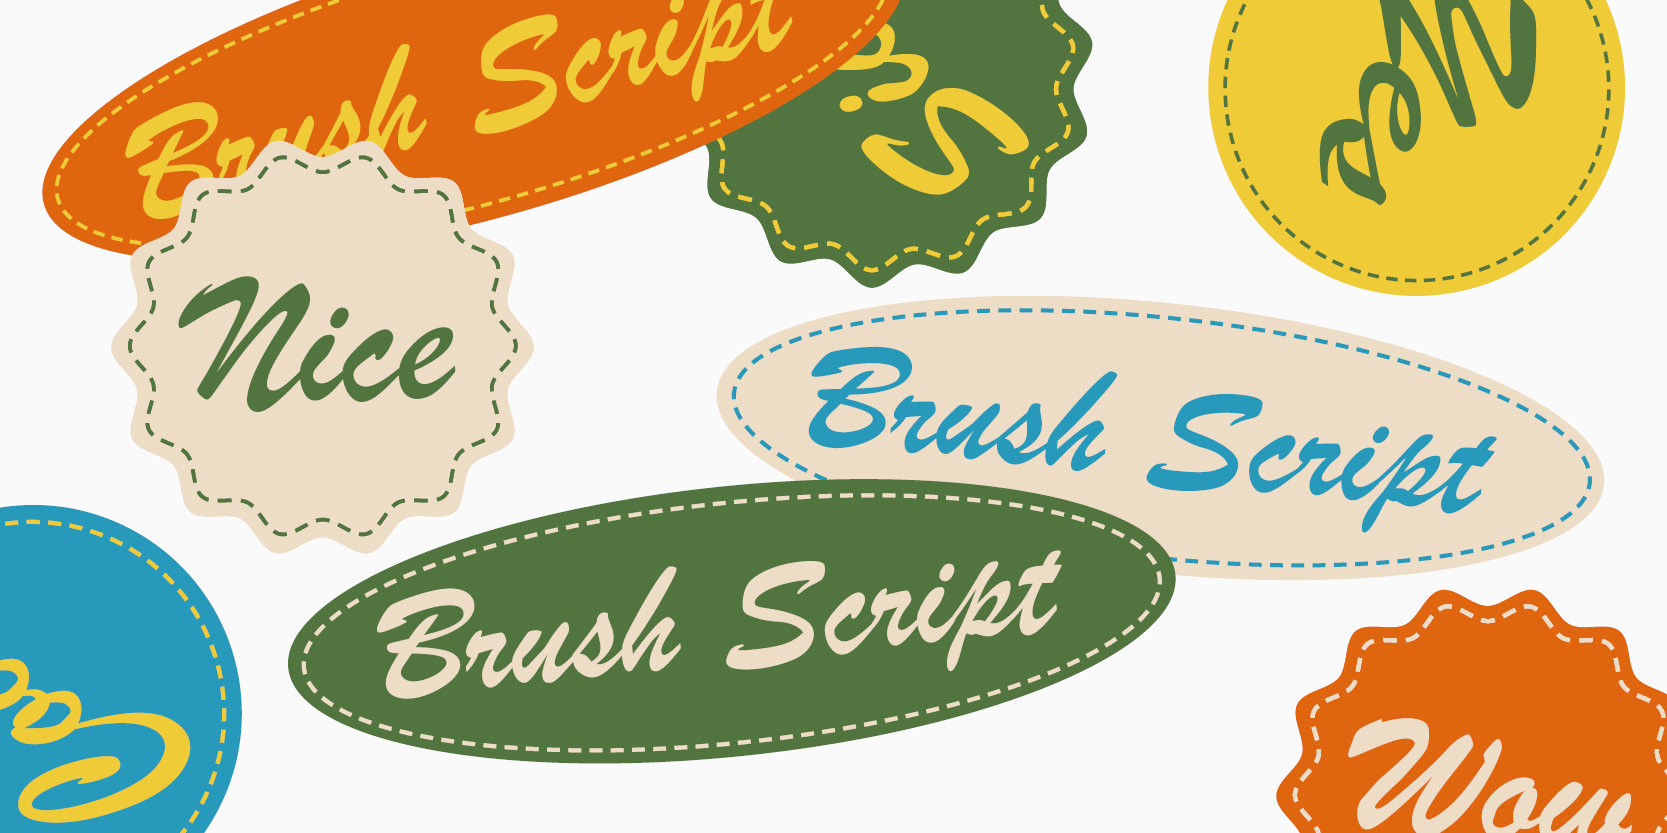 Card displaying Brush Script typeface in various styles